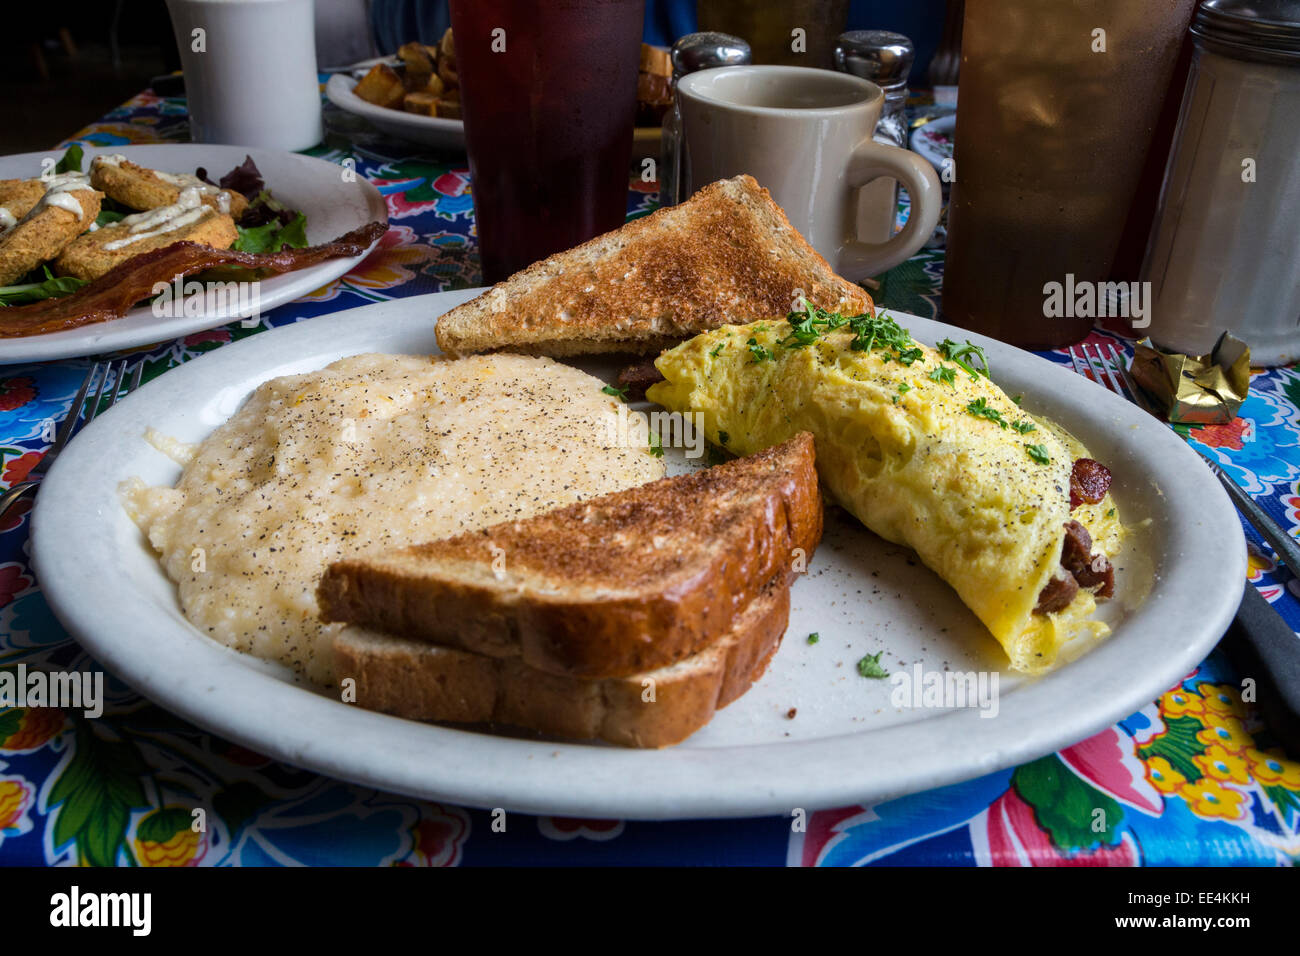 New Orleans, Louisiana.  Bacon and Sausage Omelet, Toast and Grits, Breakfast at Elizabeth's Restaurant, Bywater District. Stock Photo